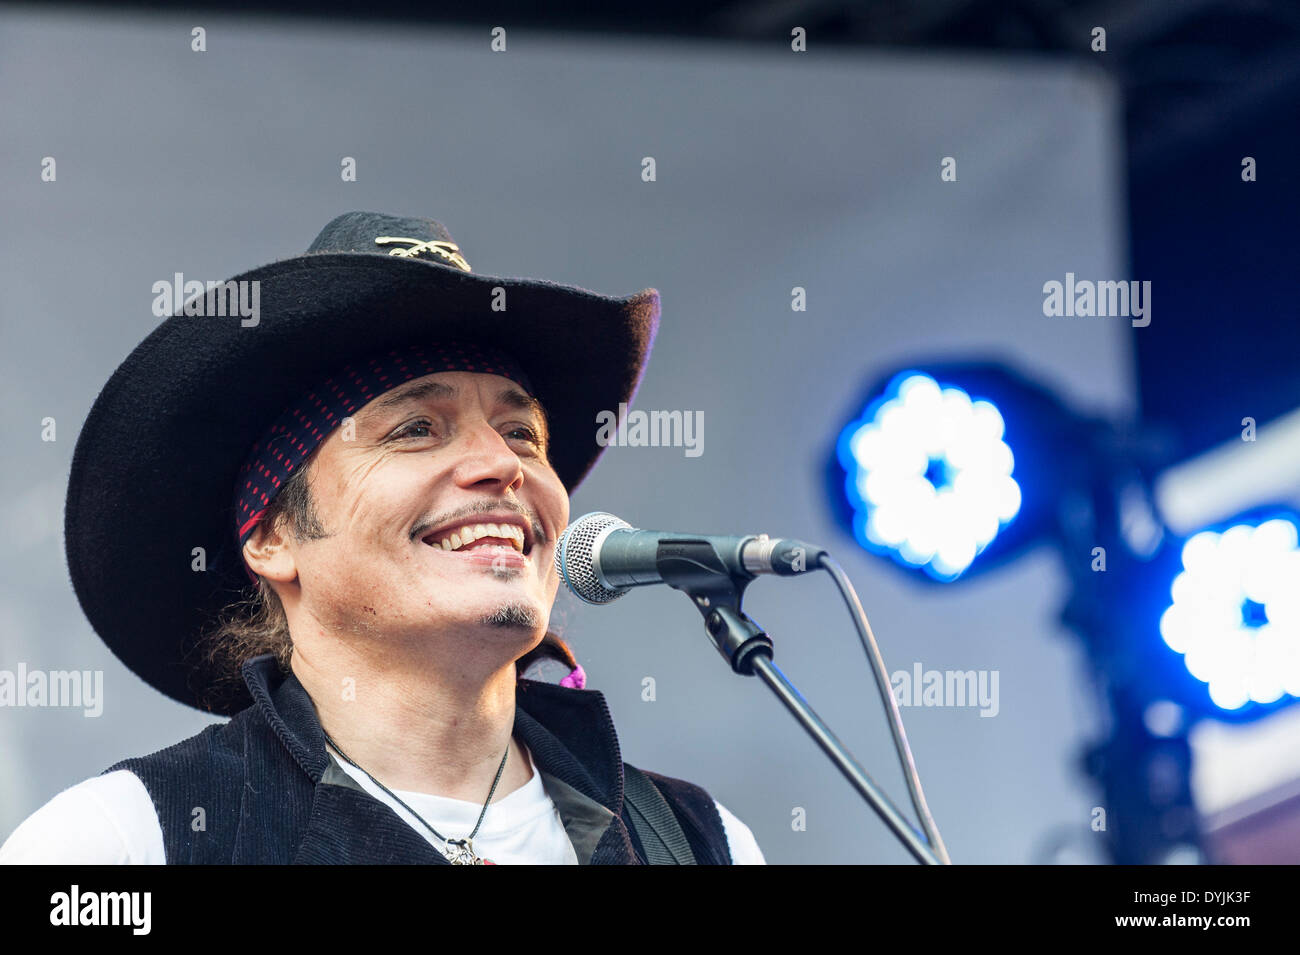 London, UK, 19th April 2014. Adam Ant enjoys himself performing at the Berwick Street Record Day in London.  Photographer;  Gordon Scammell/Alamy Live News Stock Photo